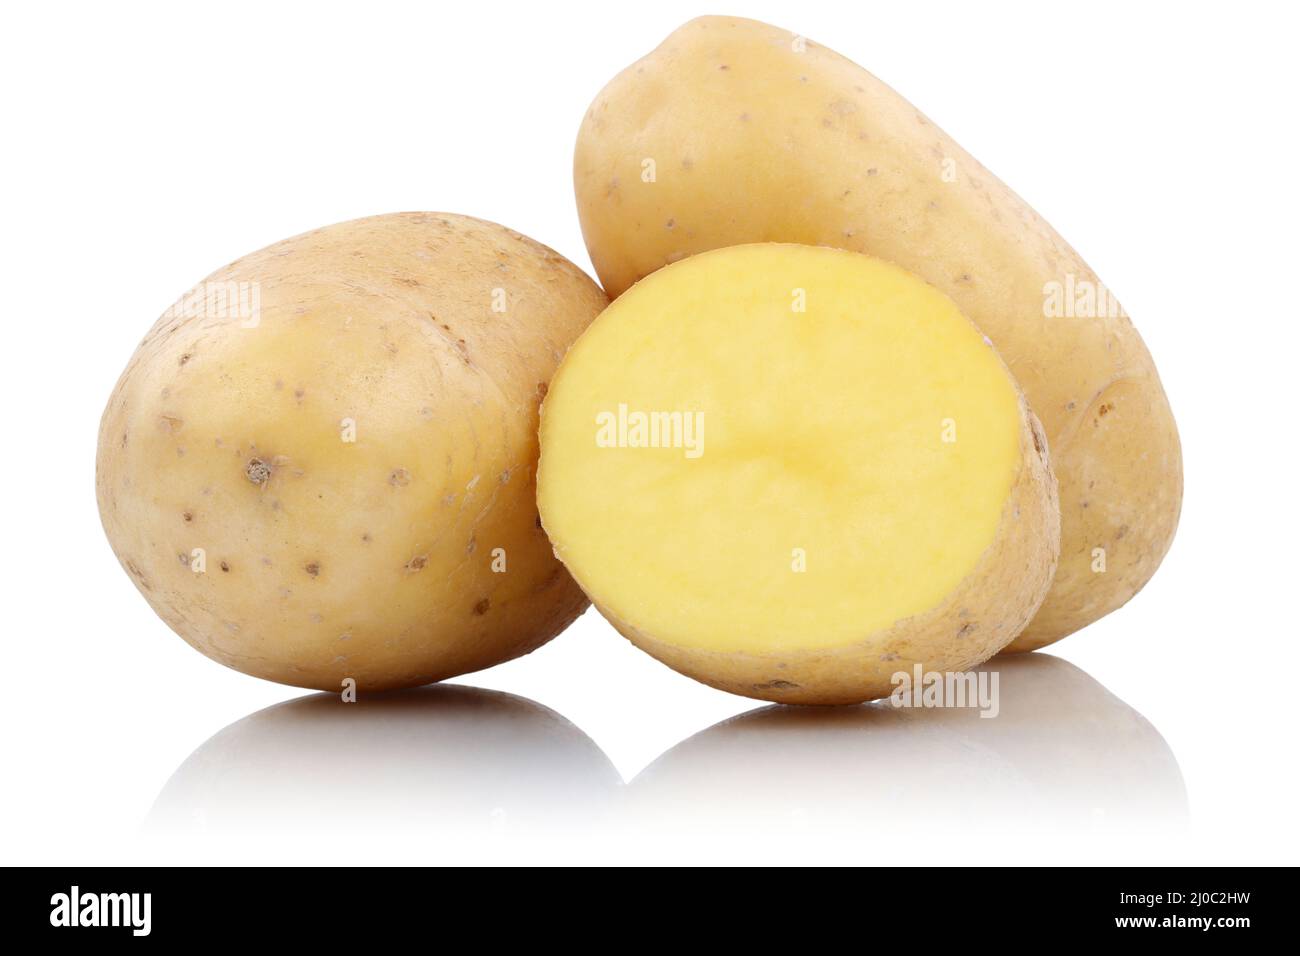 Potatoes fresh vegetables exempted isolated Stock Photo